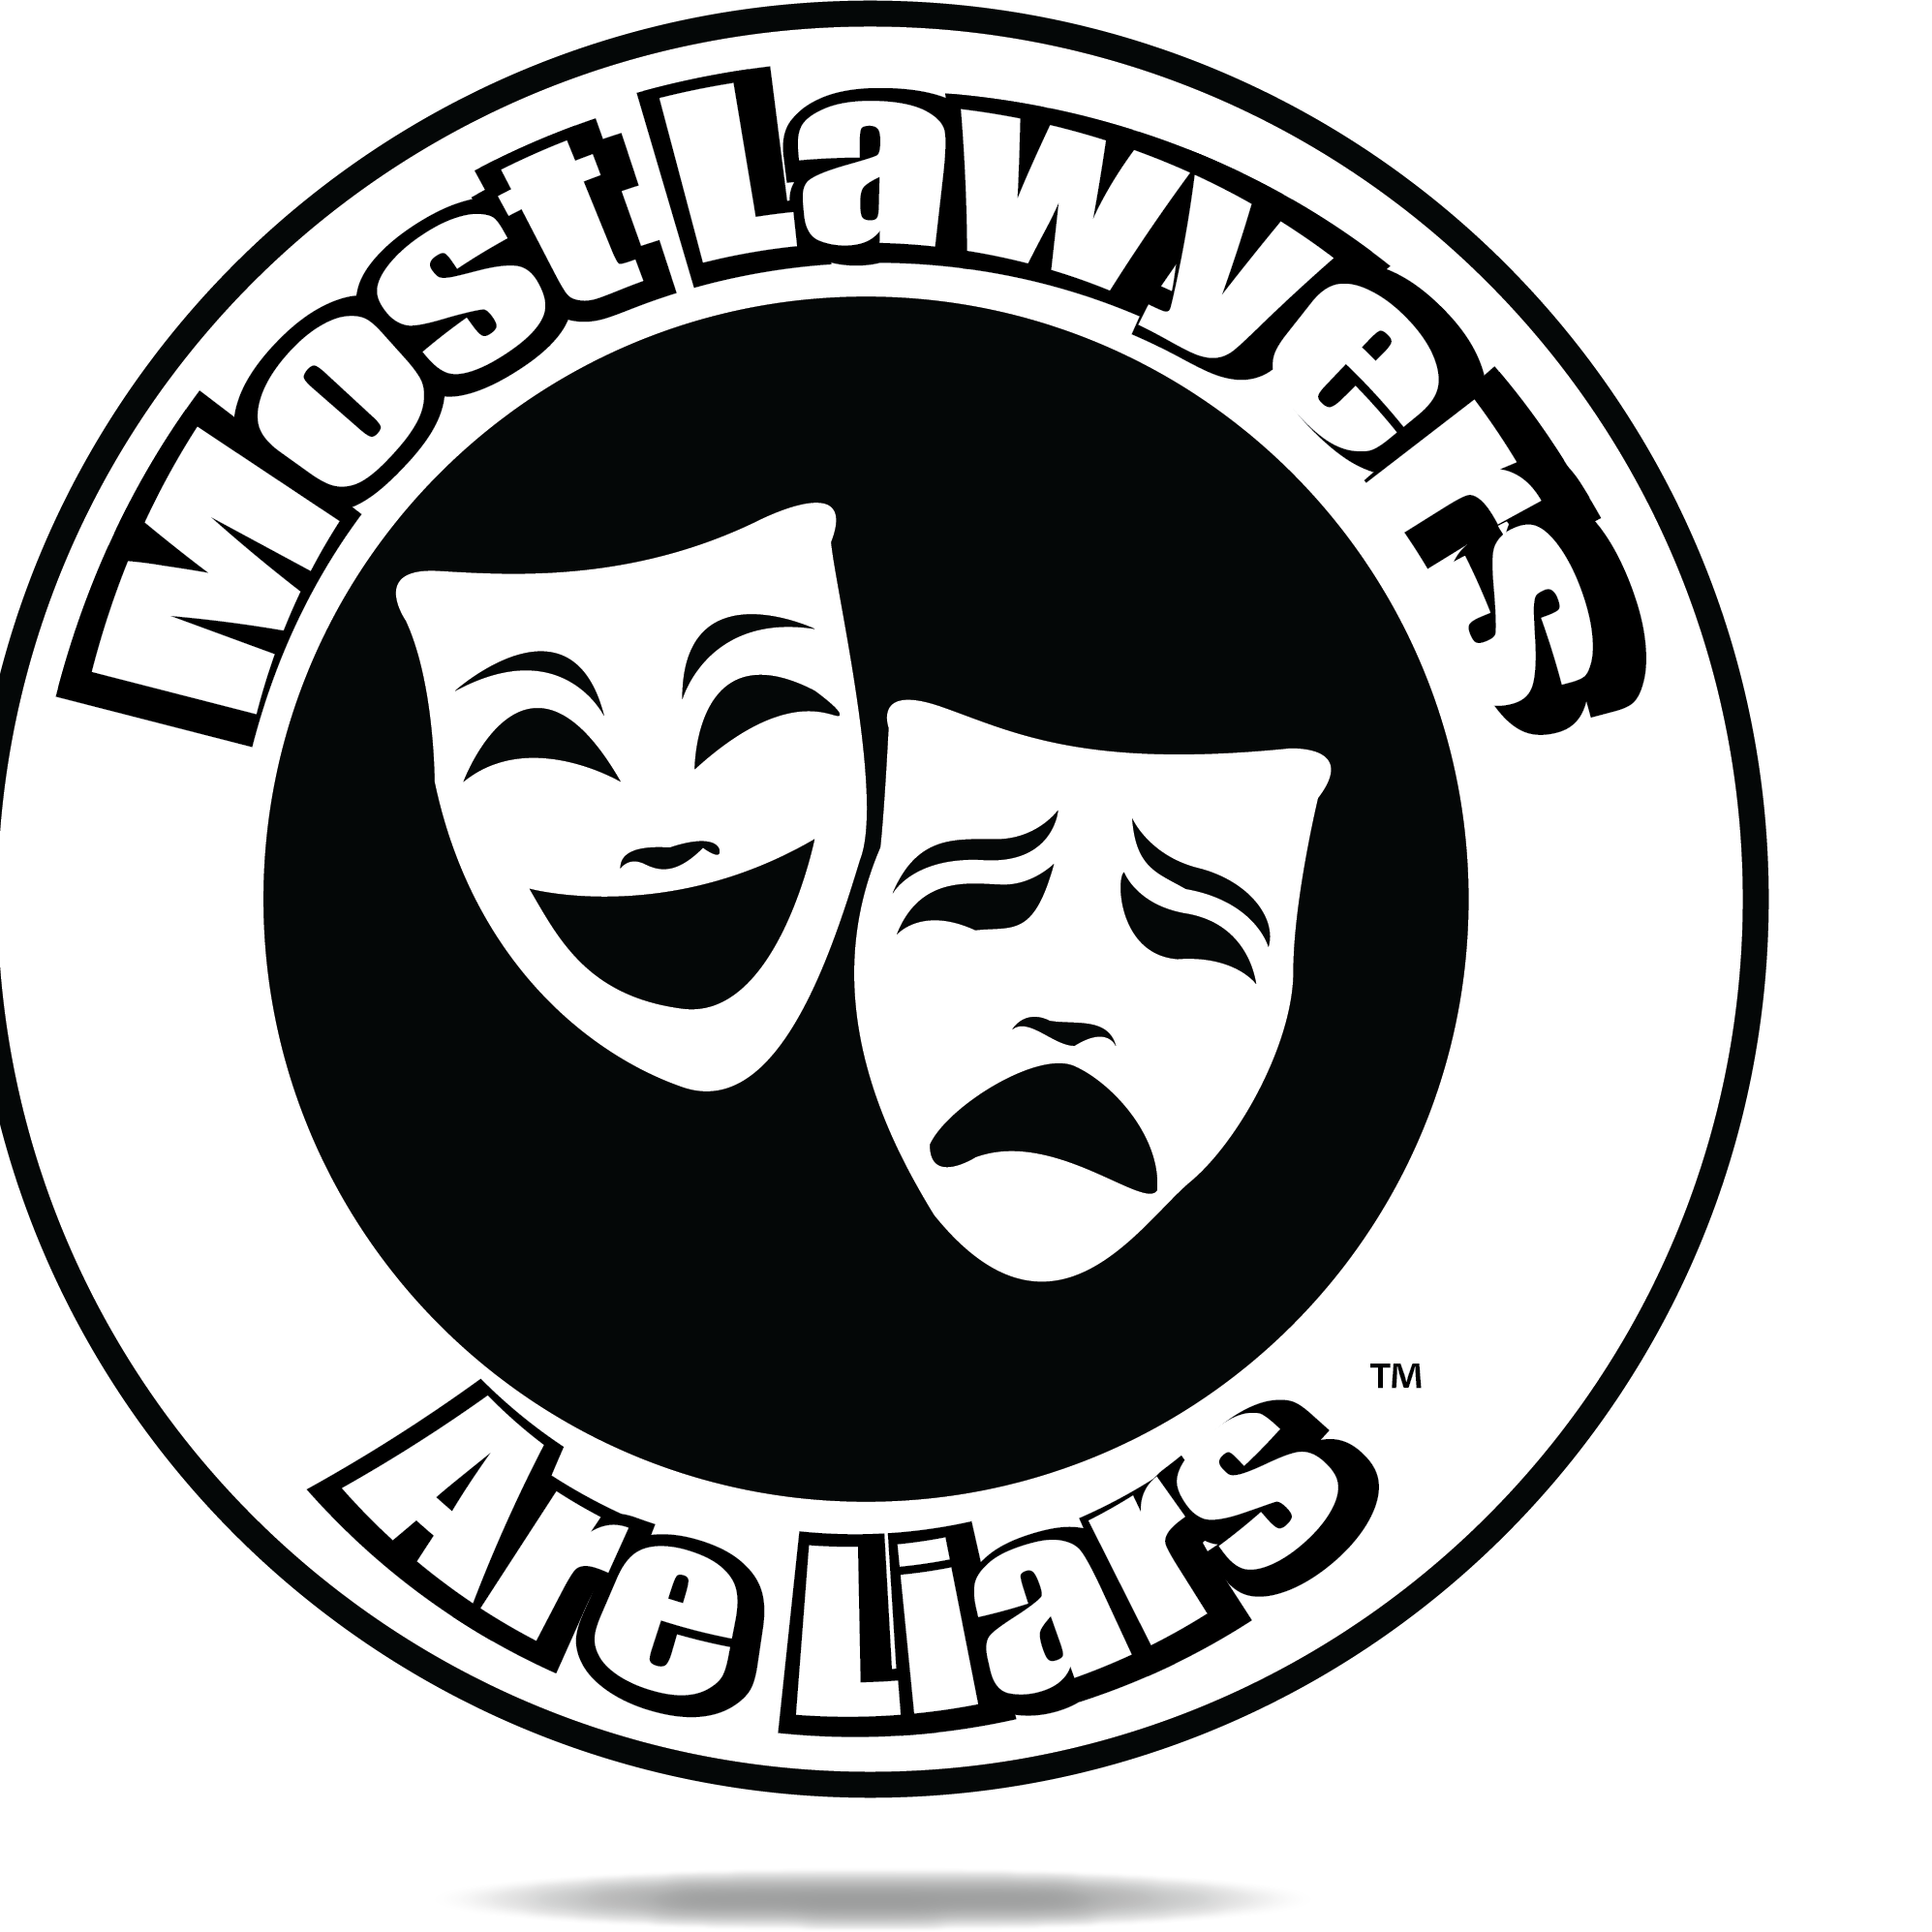 Most Lawyers Are Liars